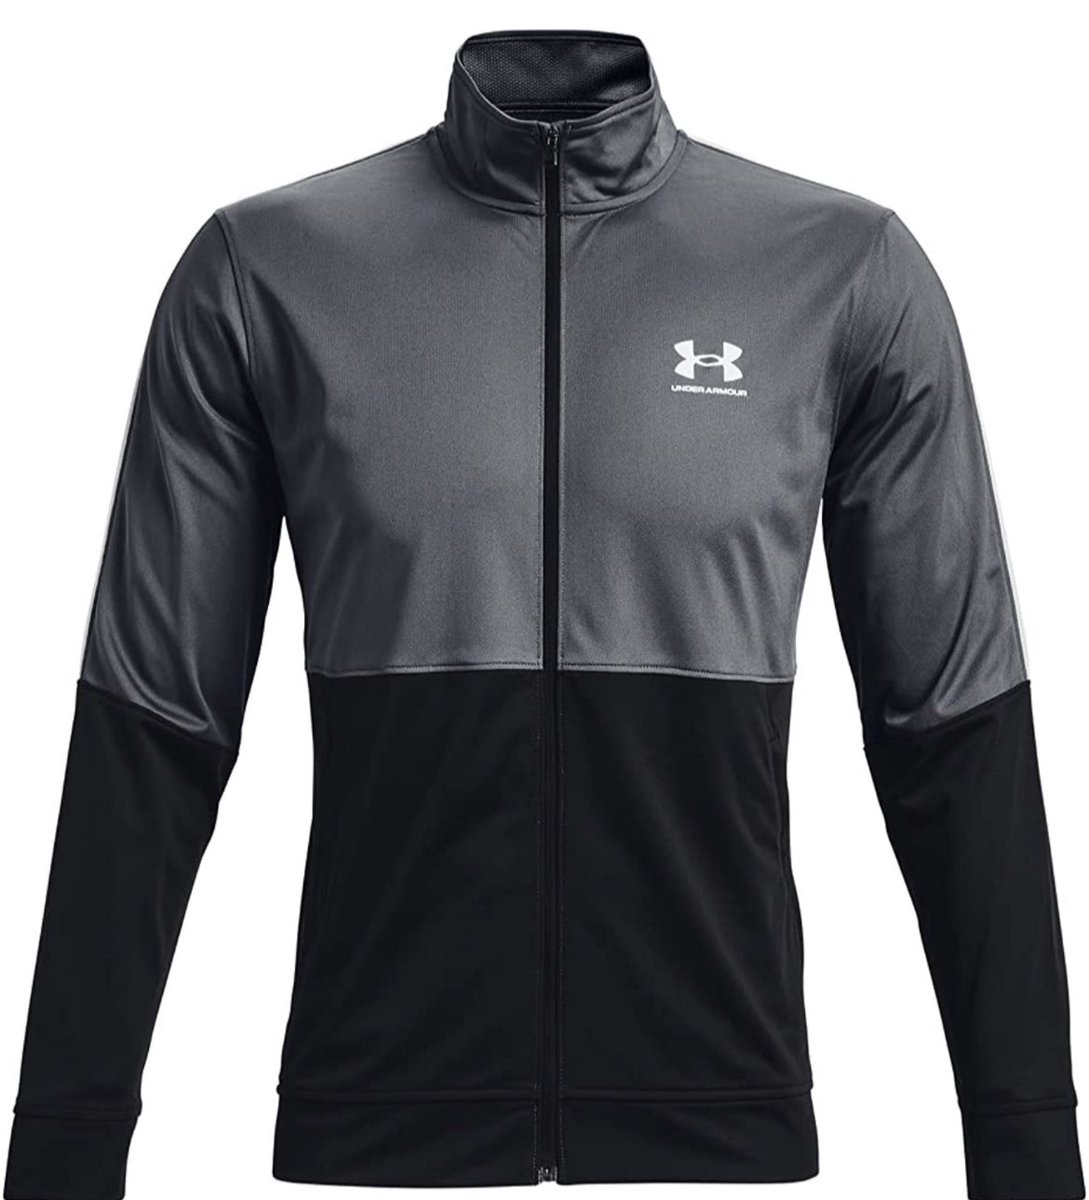 Get 50% OFF this men’s Under Armour zipper! 

Check it out here ➡️ amzn.to/45VKOKv

# ad